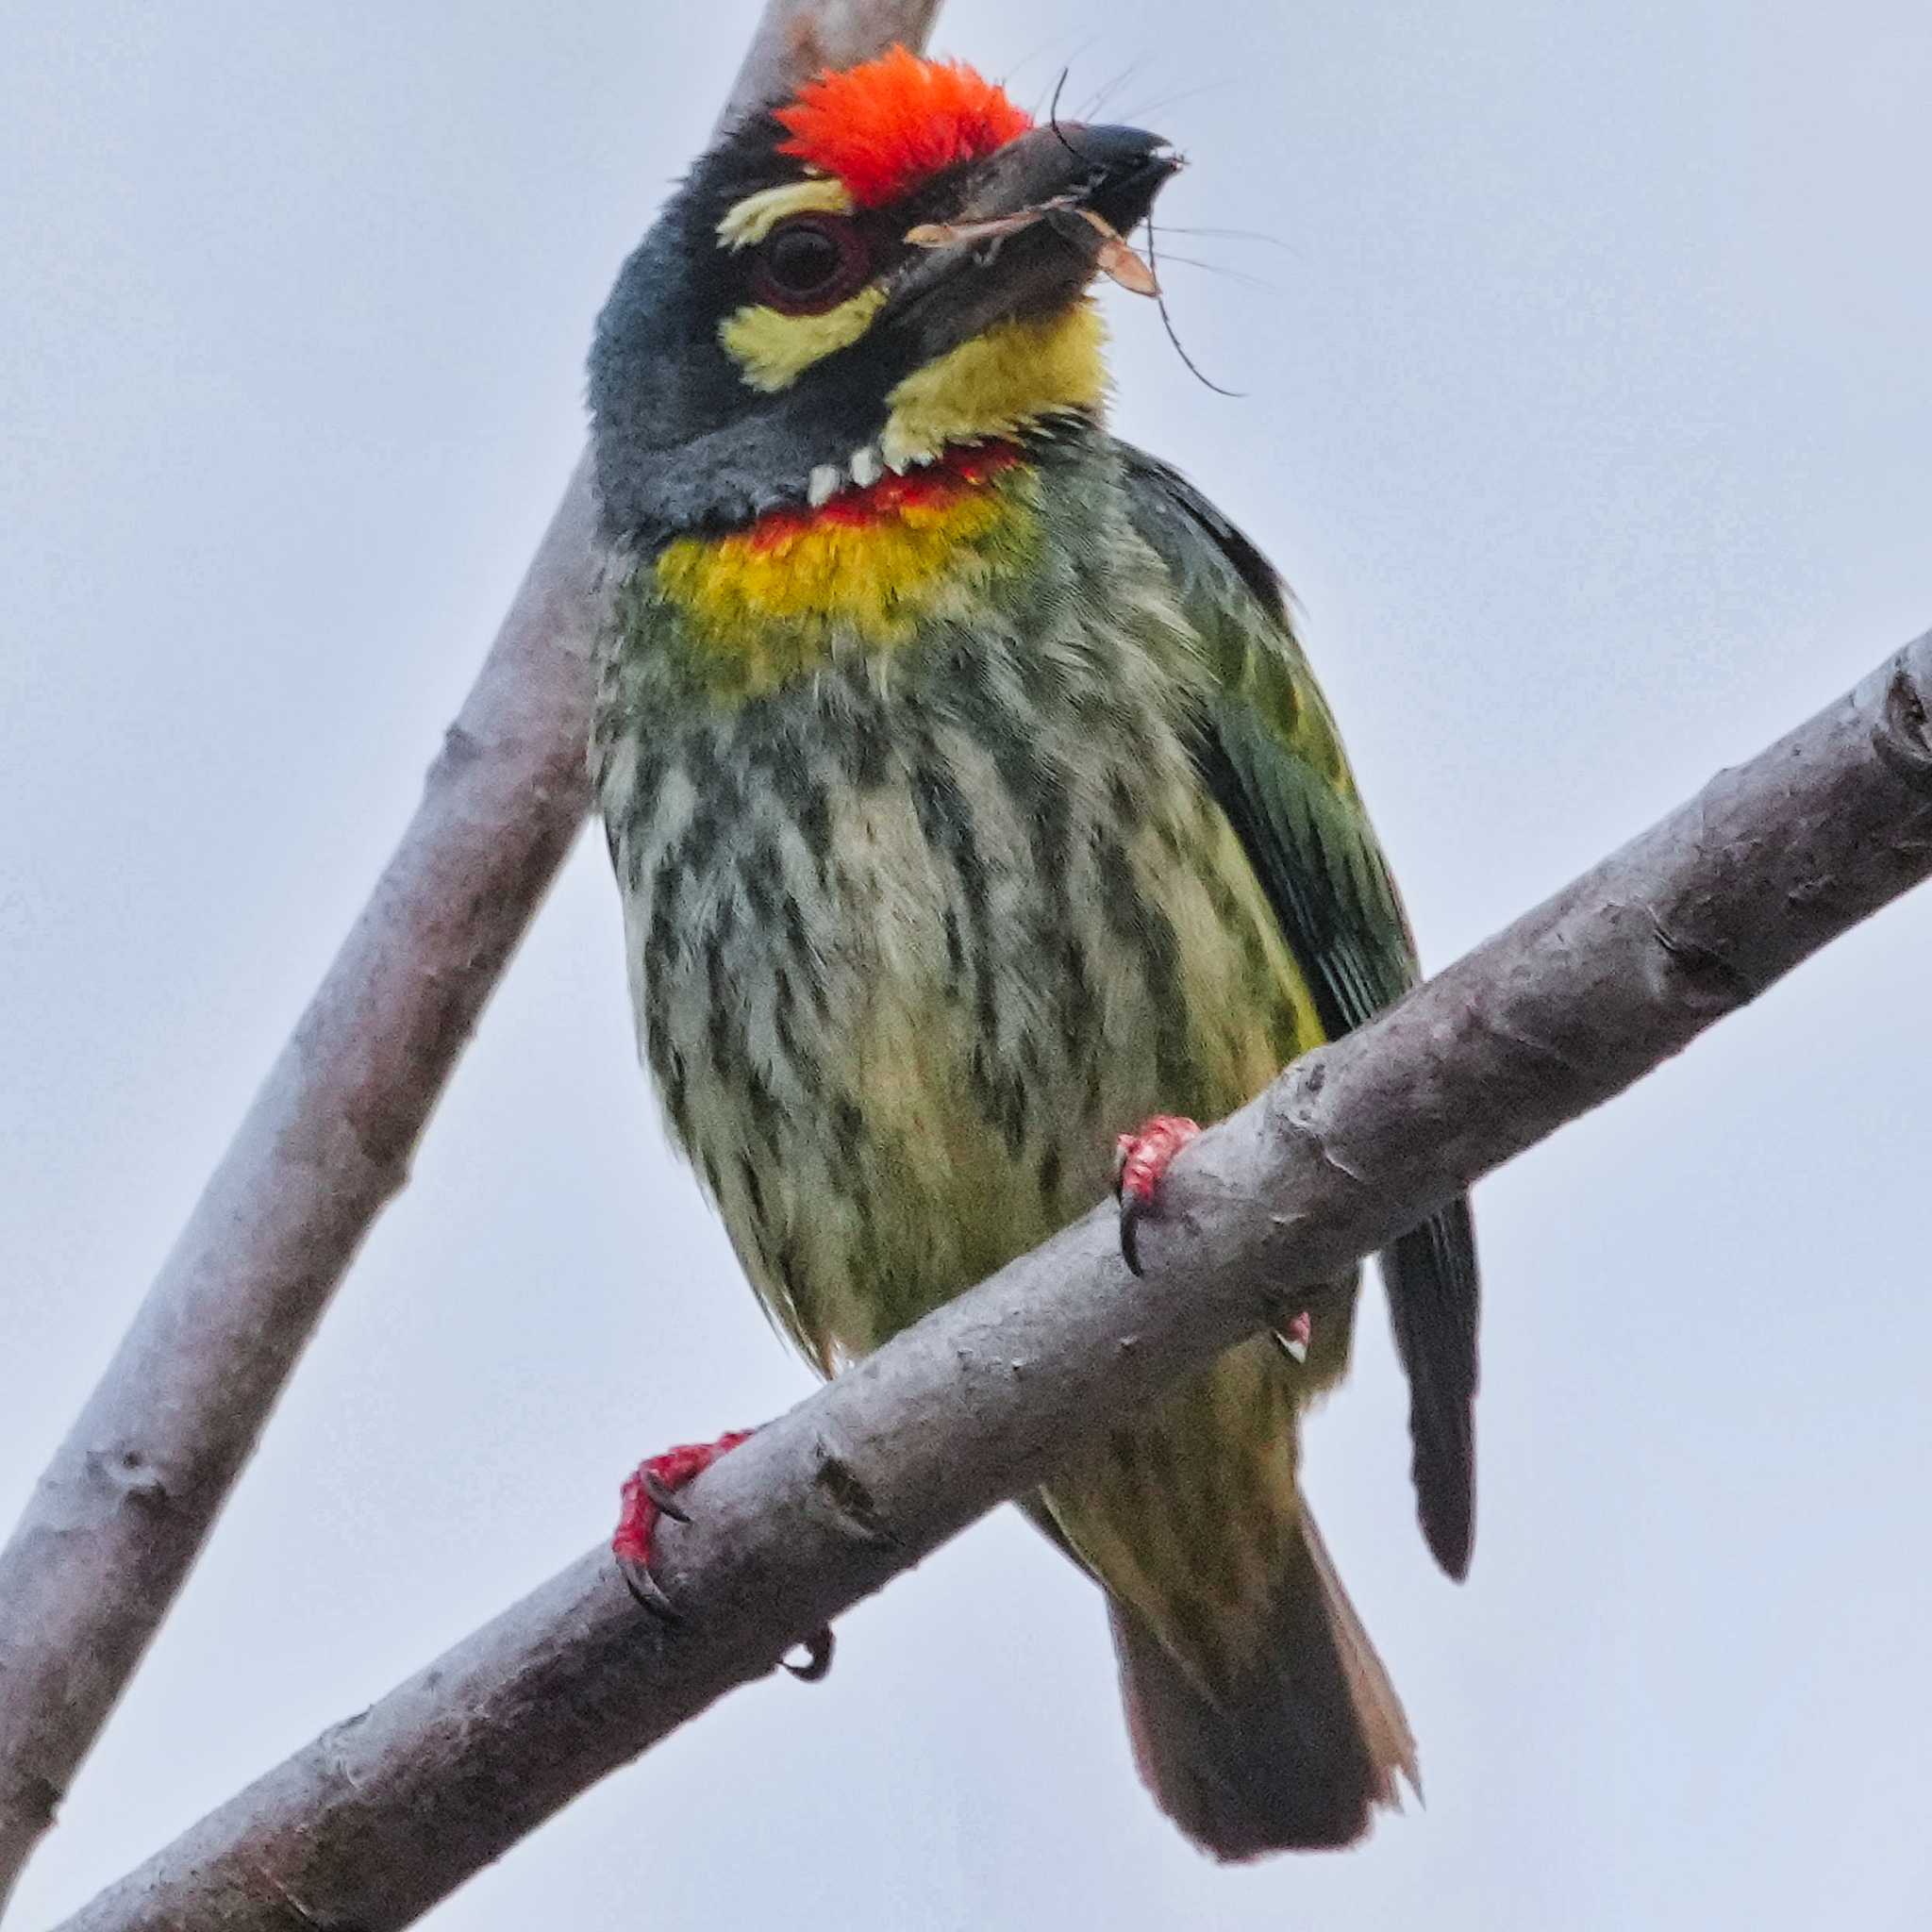 Photo of Coppersmith Barbet at Tham Pla National Park by span265